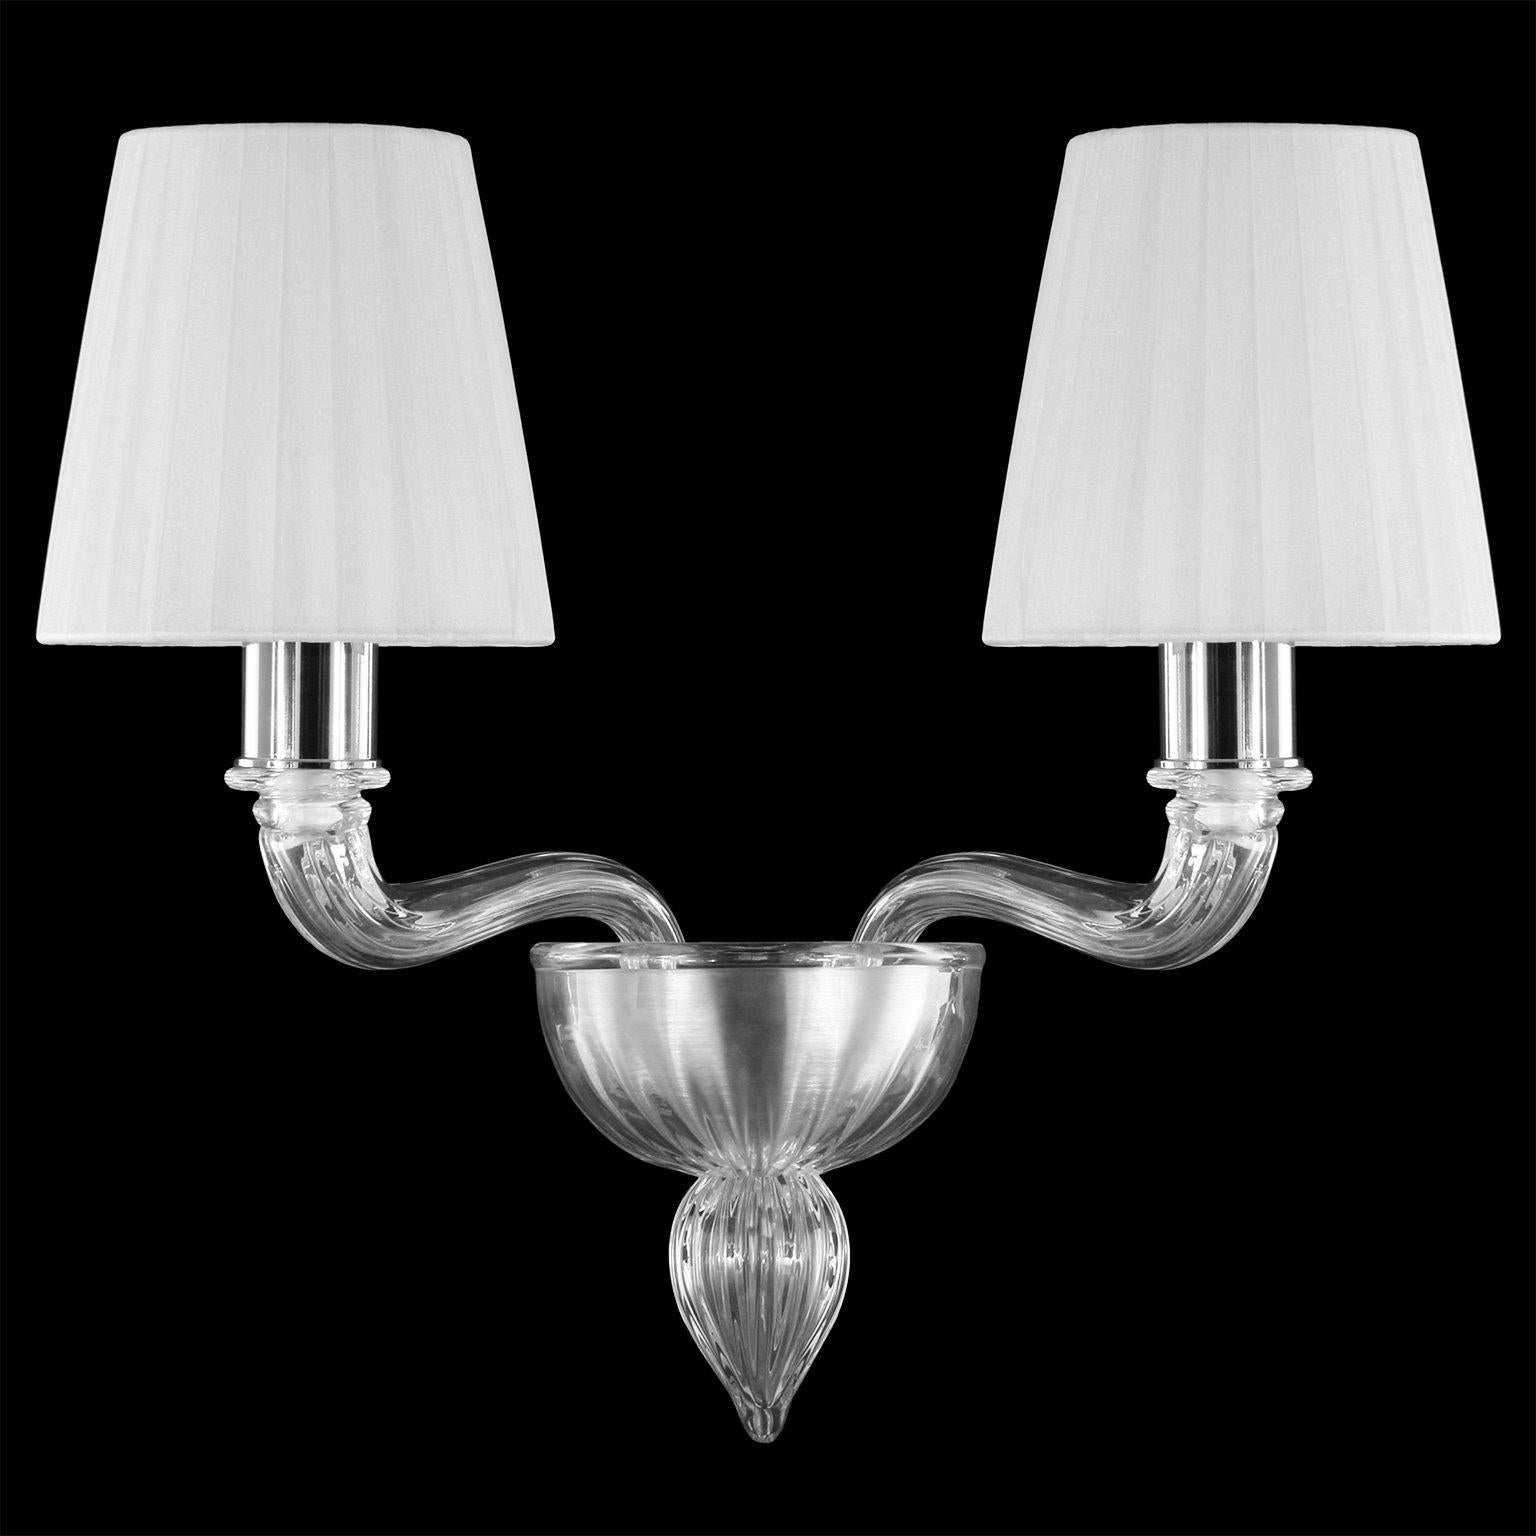 Coco sconce with 2 arms in clear Murano glass with white colour organza handmade lampshades by Multiforme.
The Murano glass Coco collection takes inspiration from Coco Chanel, the revolutionary woman that has changed the fashion industry during the